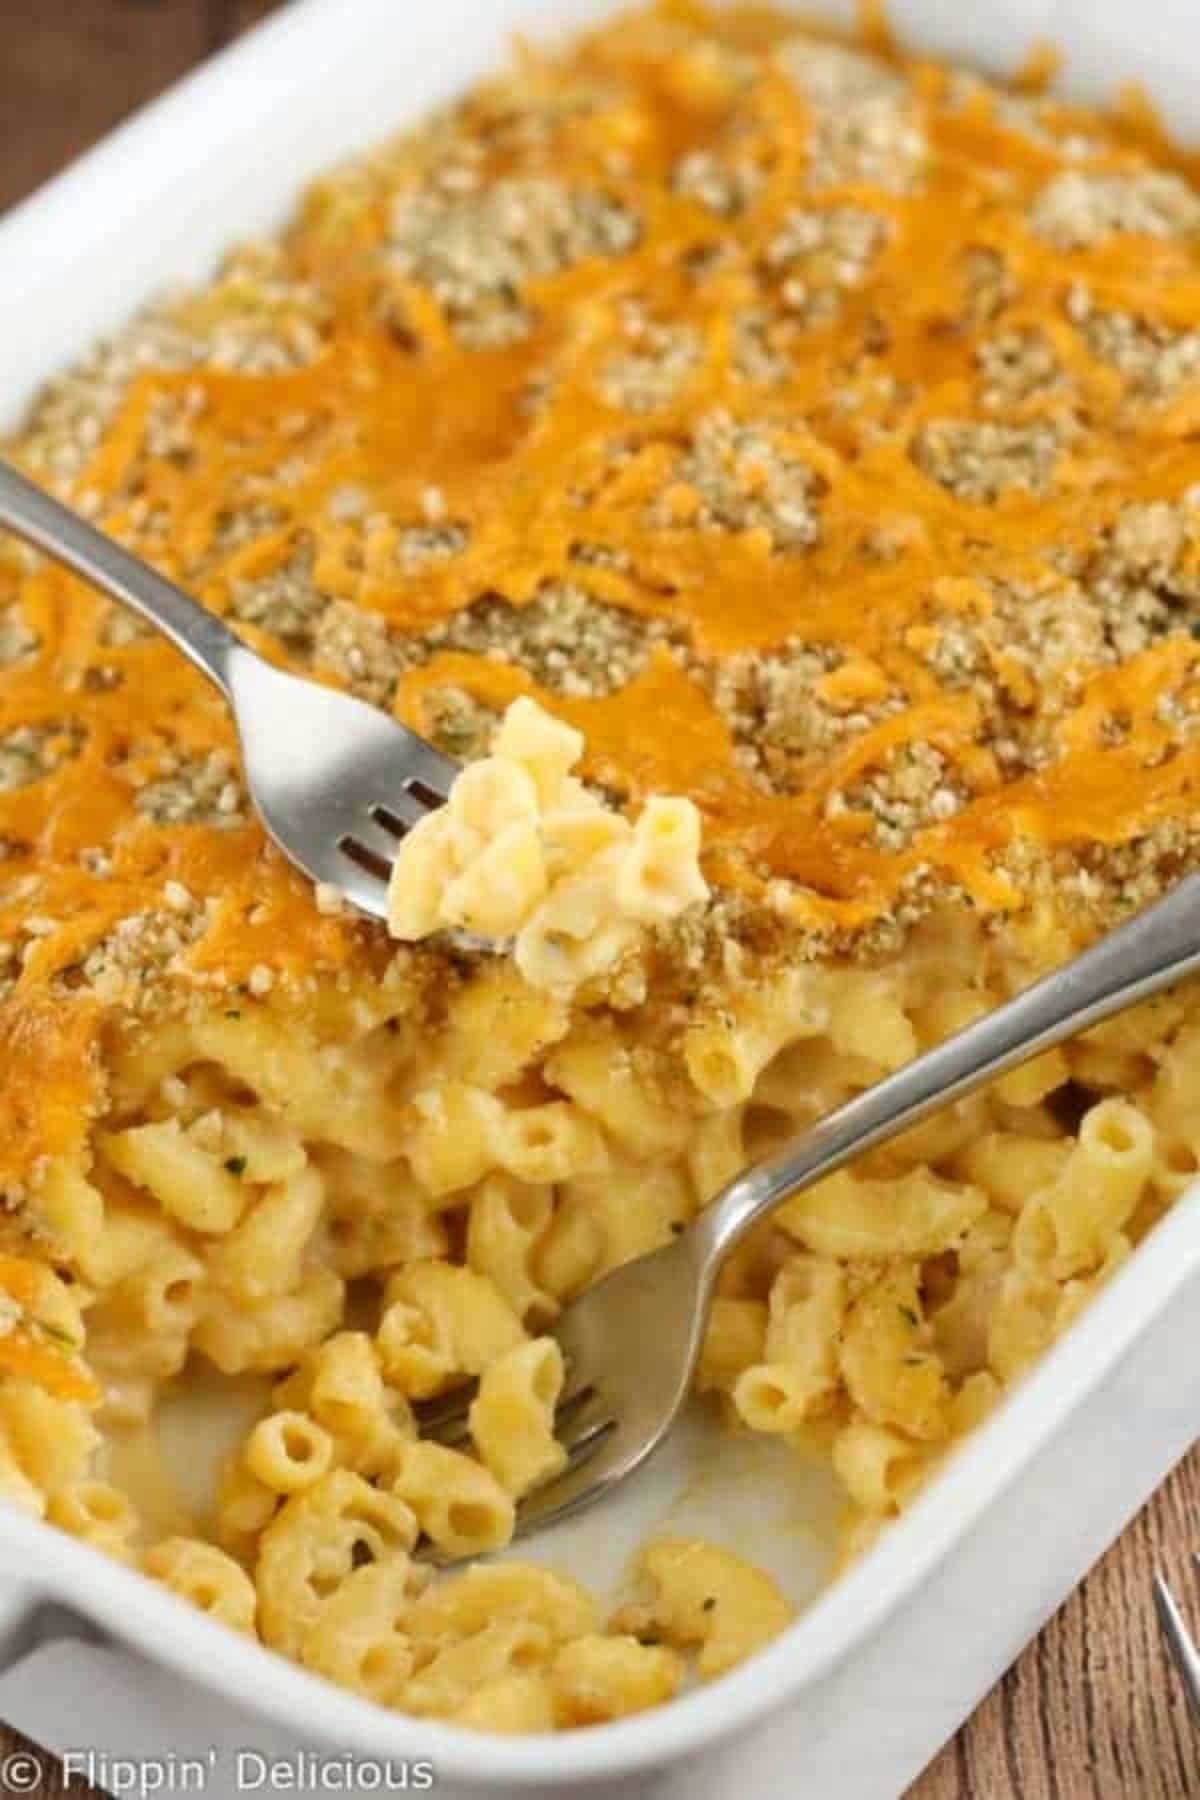 Mouth-watering Baked Gluten-Free Mac and Cheese in a white casserole with two forks.